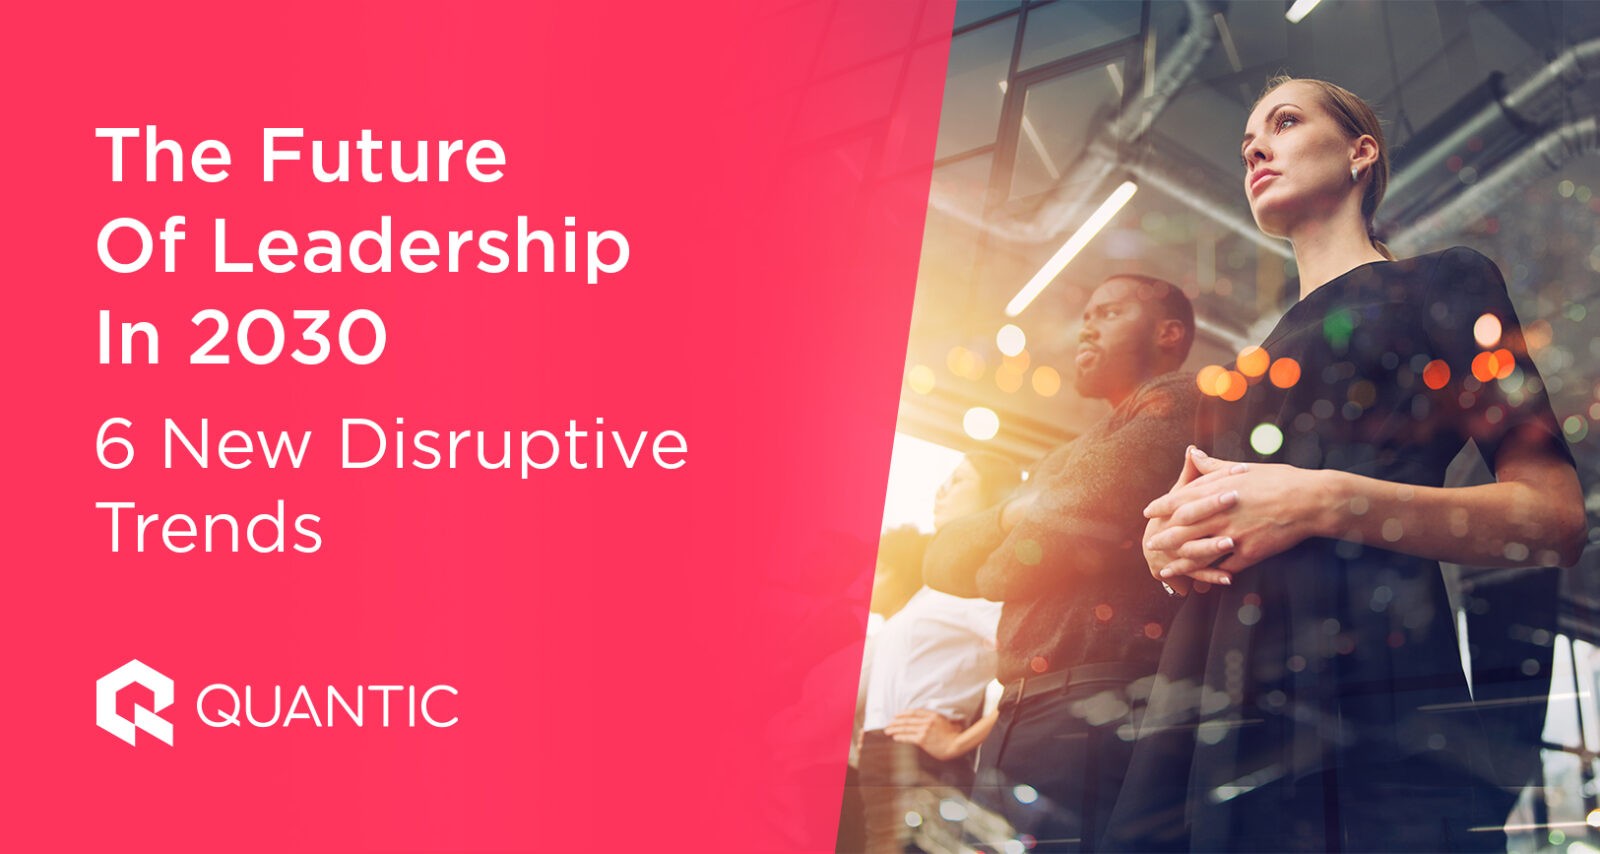 The Future of Leadership in 2030 6 New Disruptive Trends The Quantic